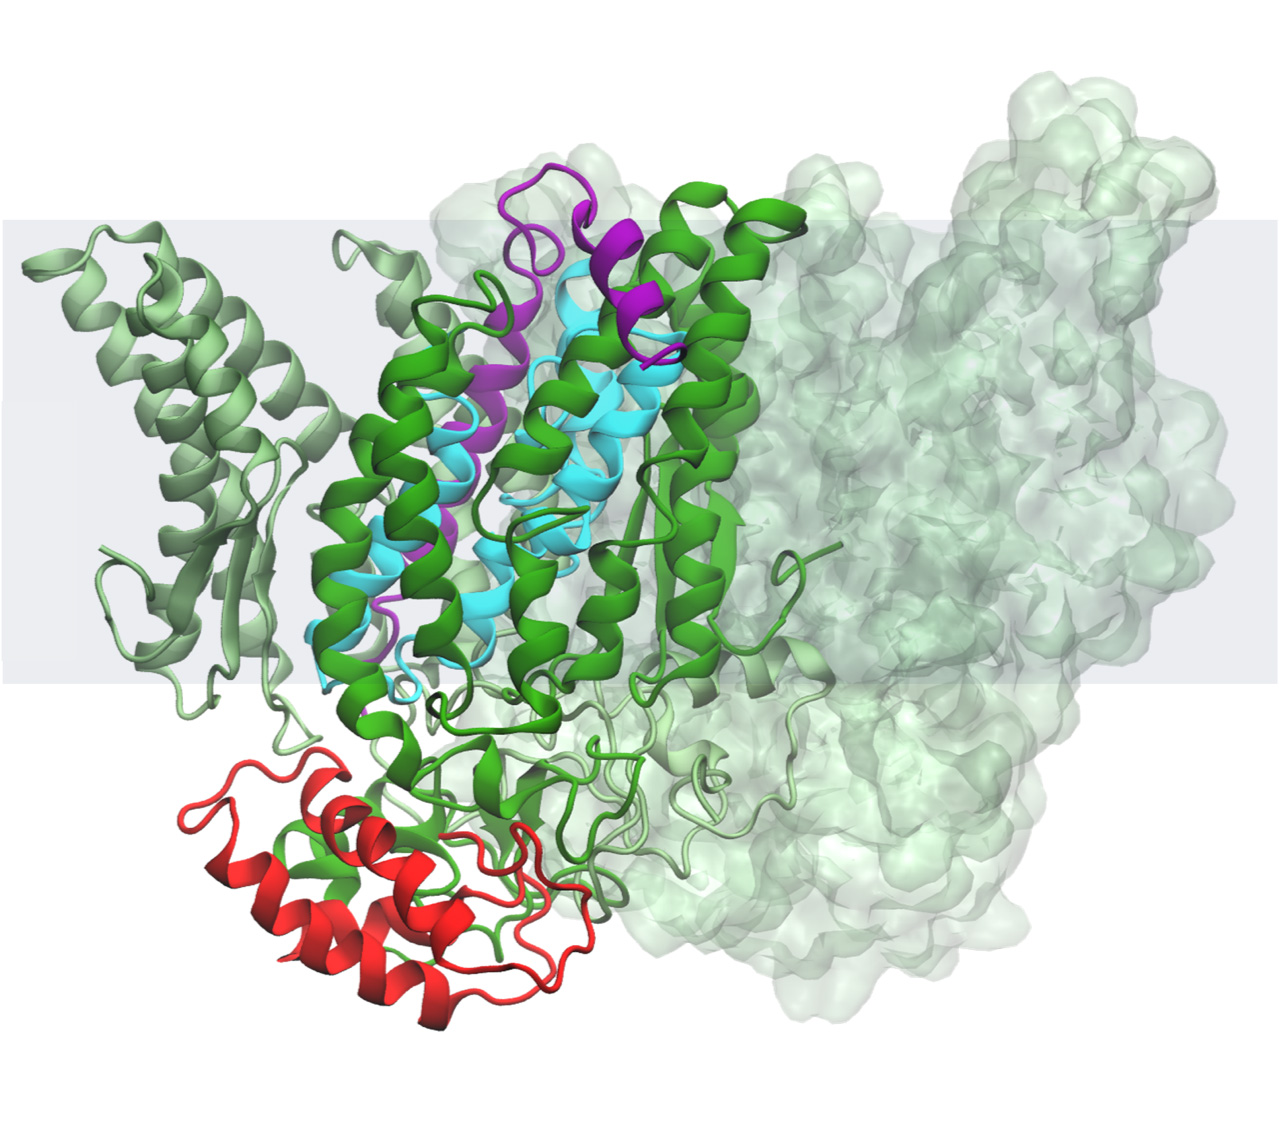 A computer rendering shows a model for the B. subtilis intramembrane protein complex. The intramembrane protease is shown in green, with parts of it faded and represented as a blobby surface in the background. In the foreground it is shown as interconnected ribbons standing vertically and spanning a gray rectangle, which represents a cell membrane. Tucked in between the green ribbons is a cyan ribbon that blocks a small pocket in the middle of the green and a purple ribbon that connects the cyan ribbon to a green ribbon. Underneath these ribbons, a red horizontal ribbon is prevented from entering the membrane protein.